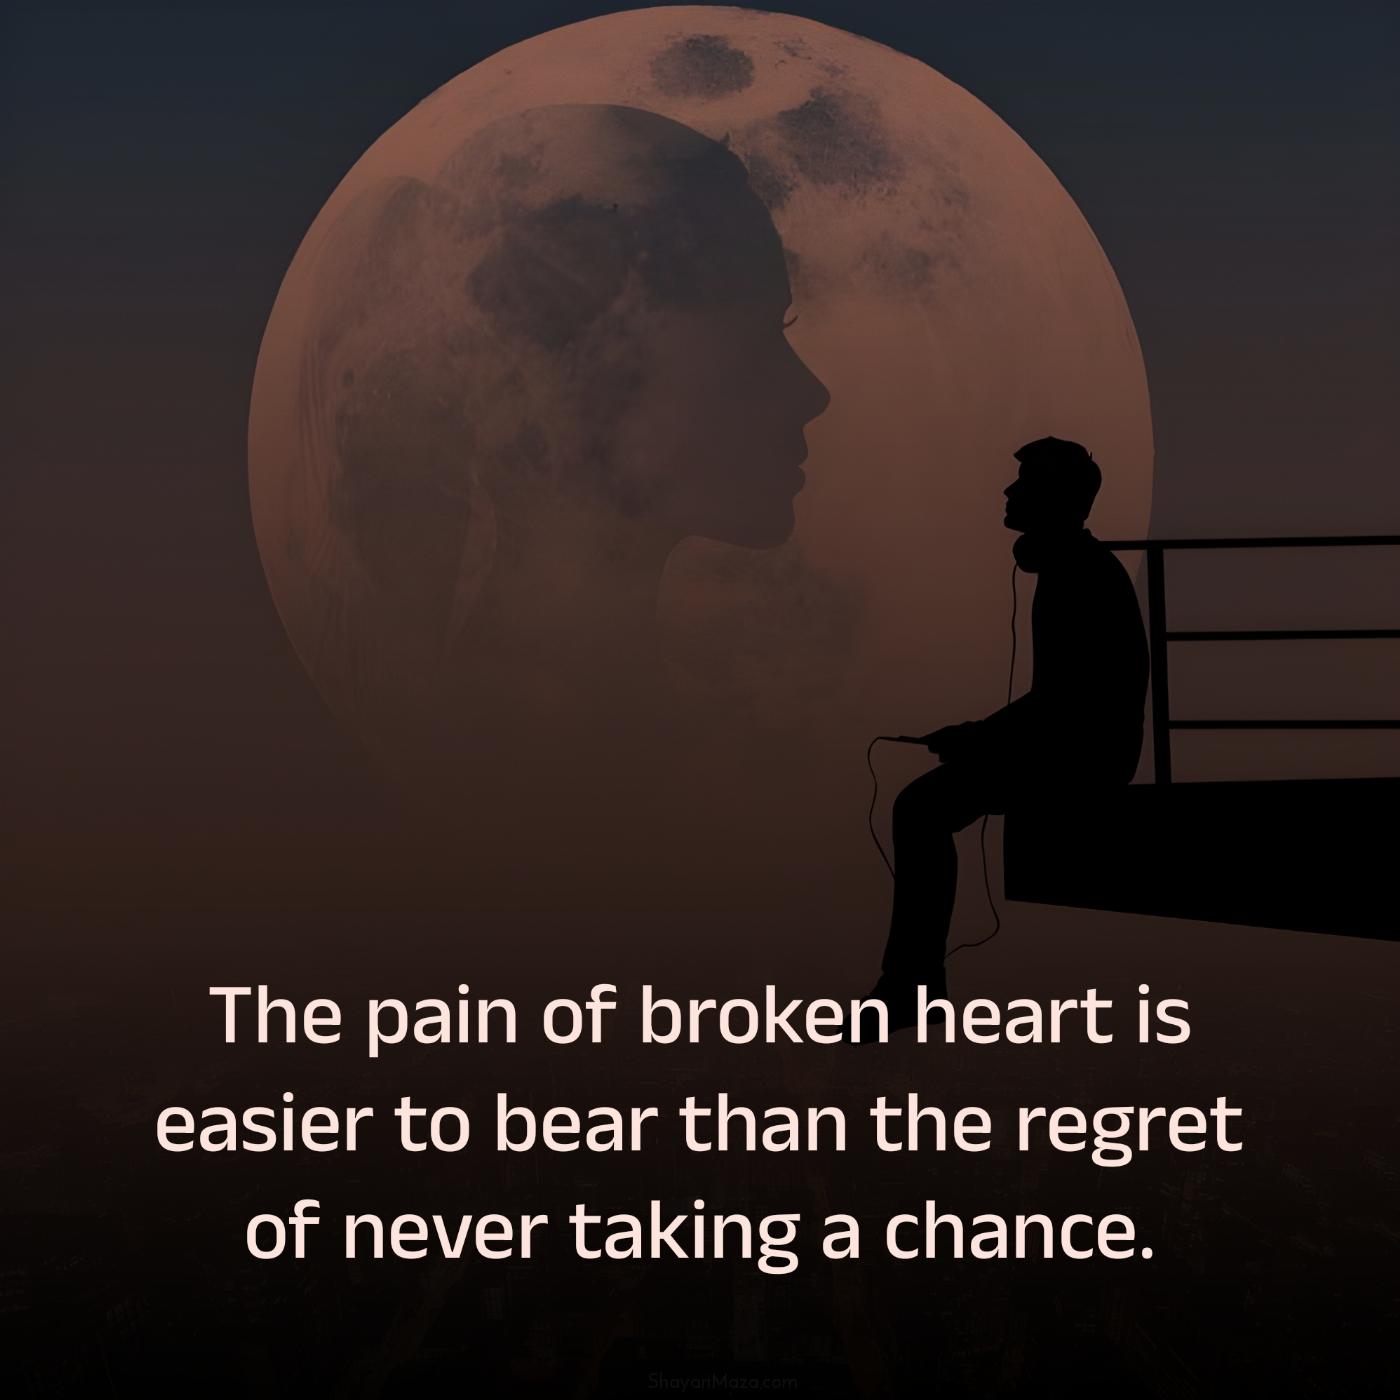 The pain of broken heart is easier to bear than the regret